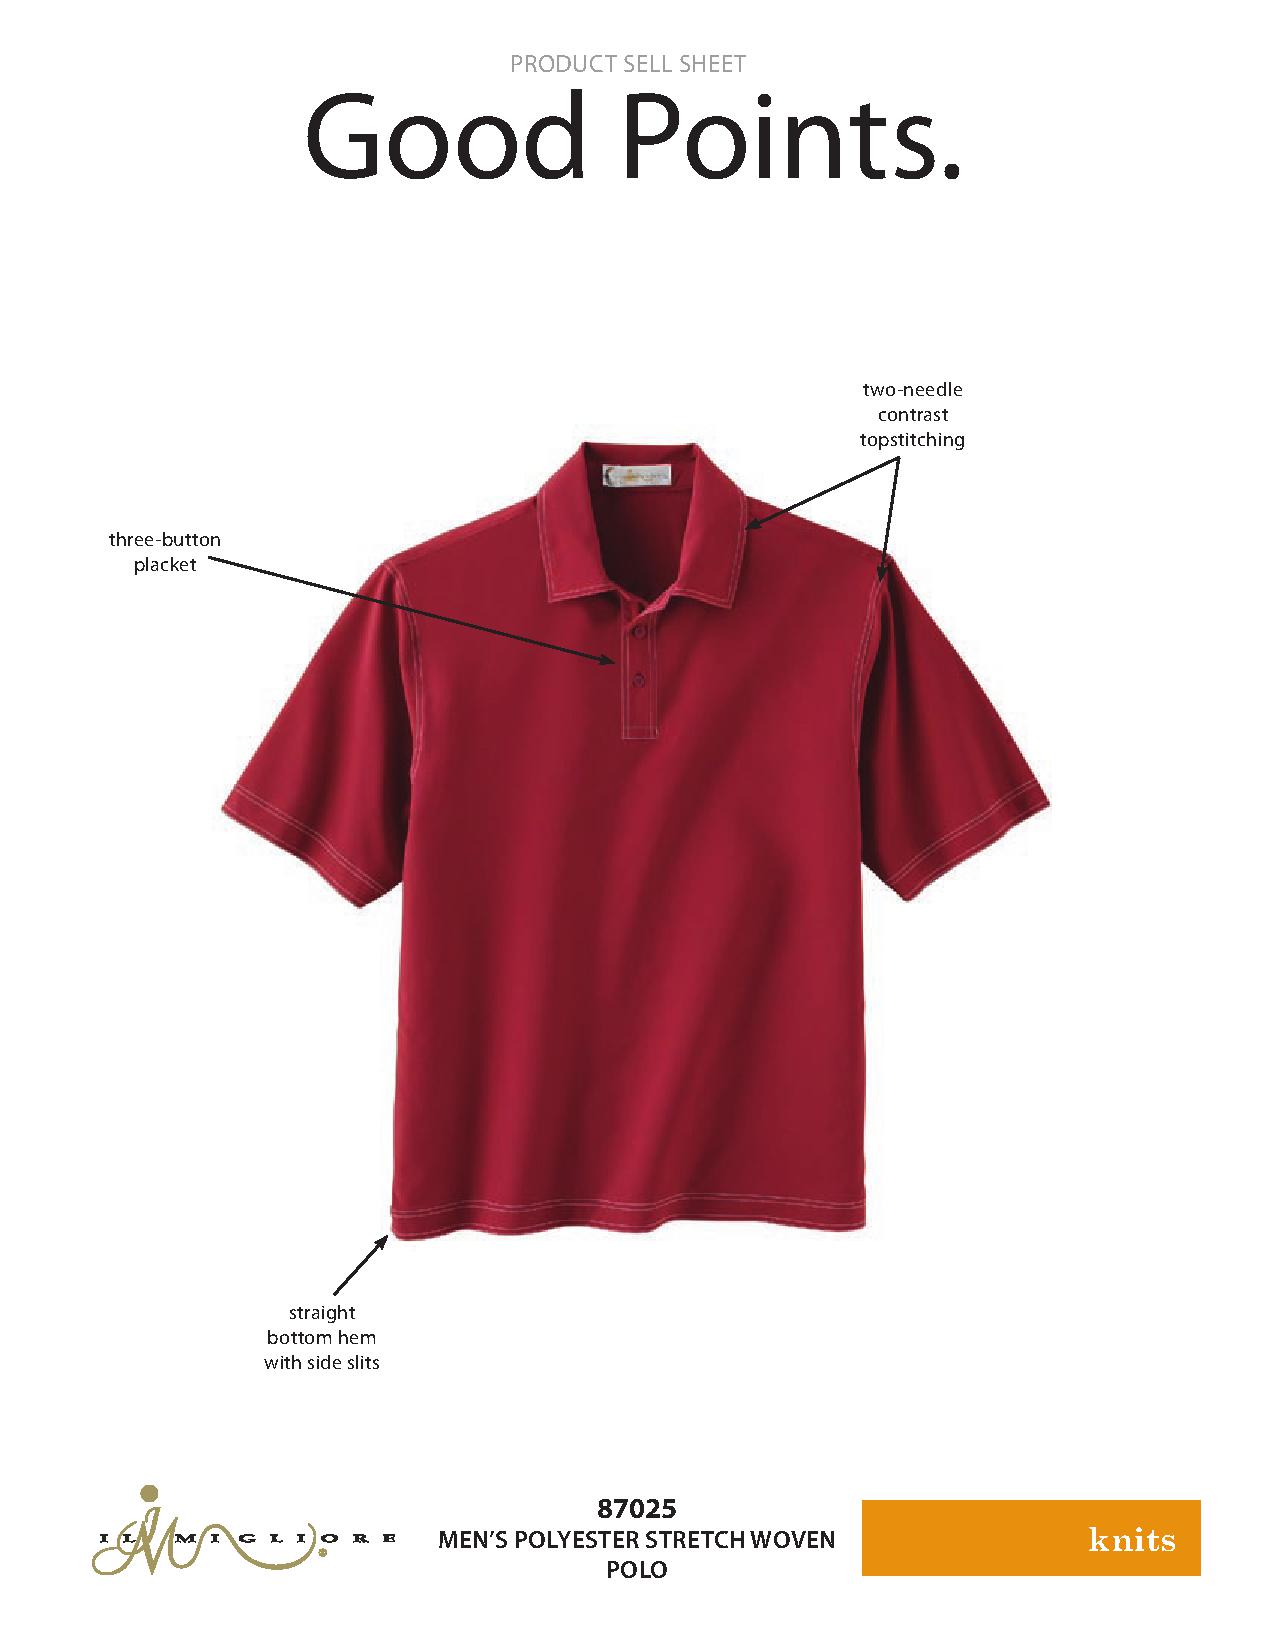 Ash City Stretch 87025 - Men's Performance Polyester Stretch Woven Polo